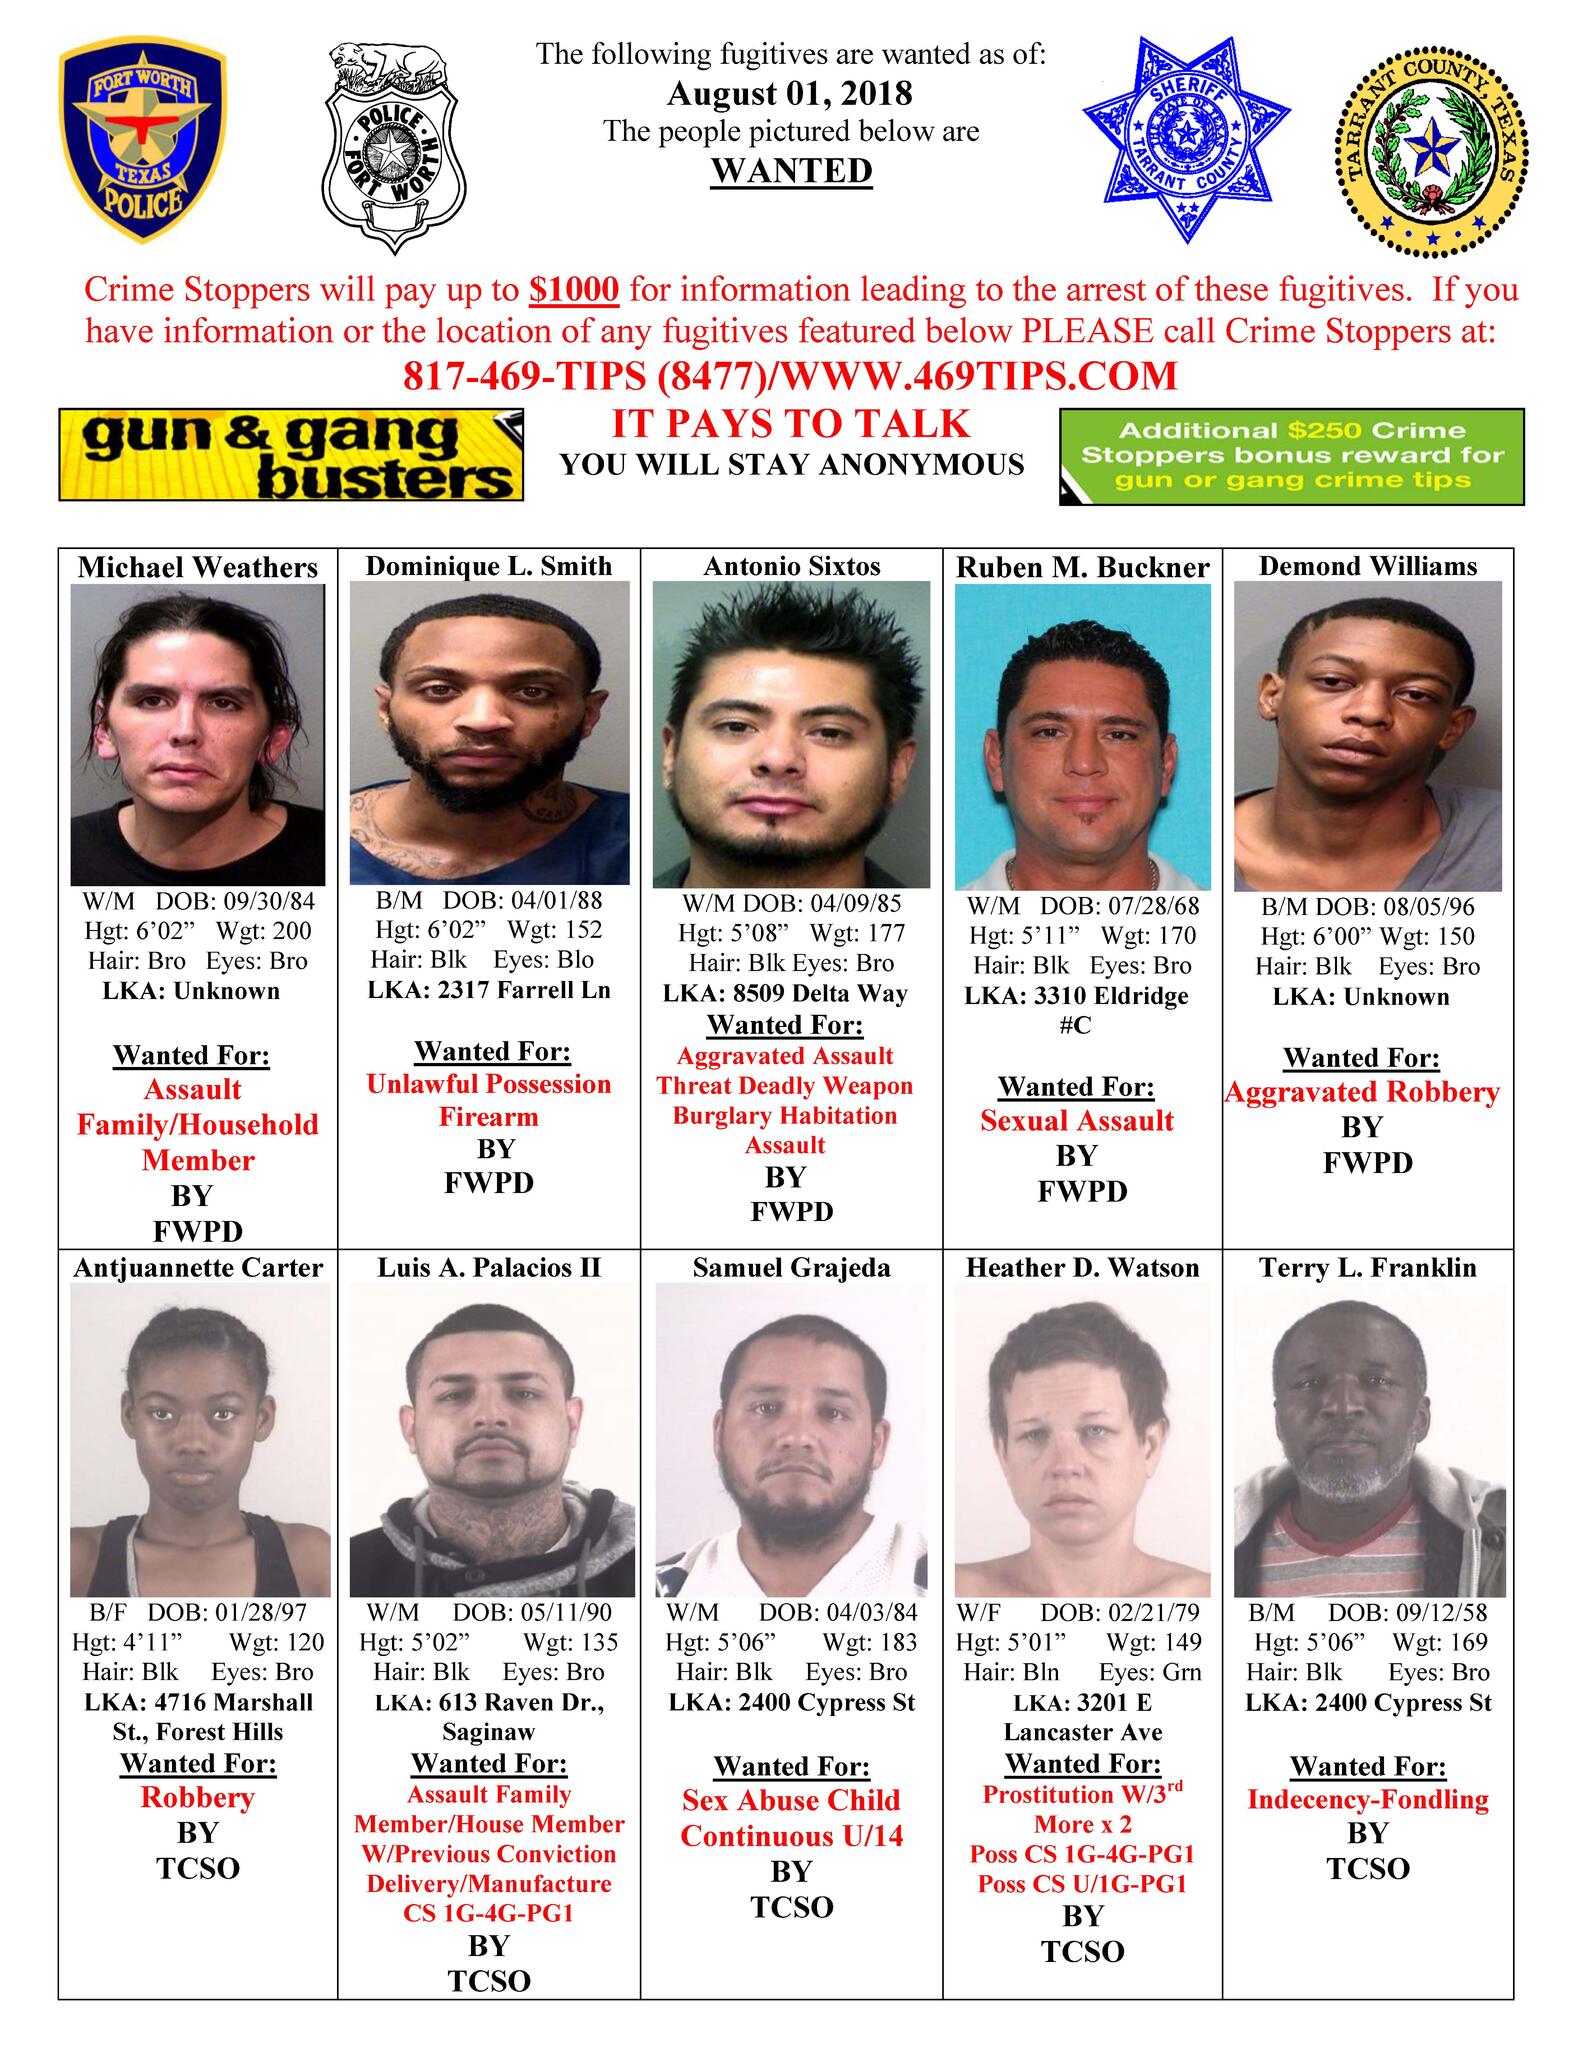 Top Ten Most Wanted Fugitive Flyer (Fort Worth Police Department